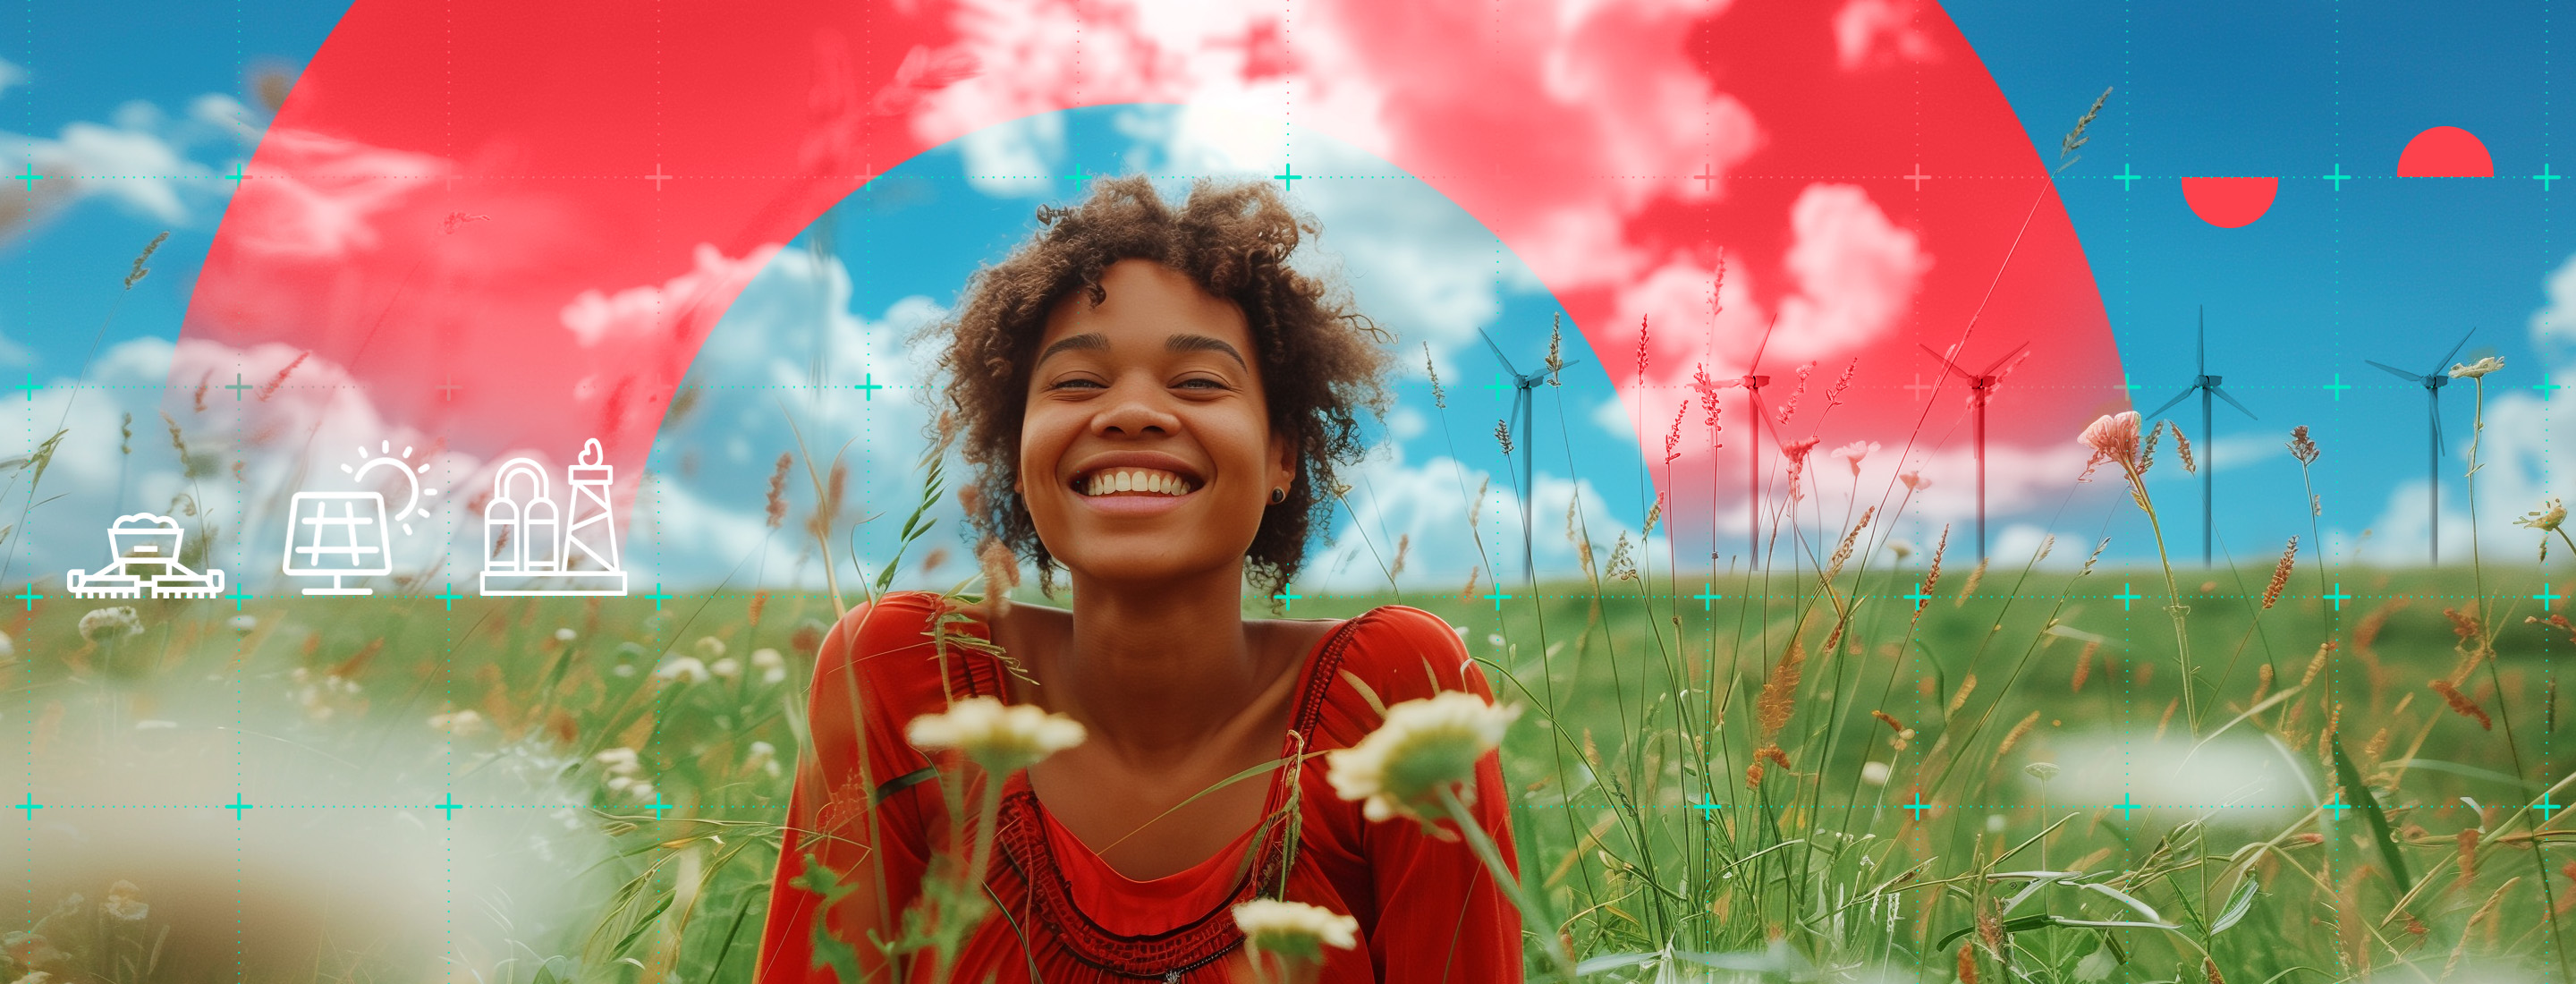 A young woman surrounded by luscious nature and wind turbines smiles at the camera.